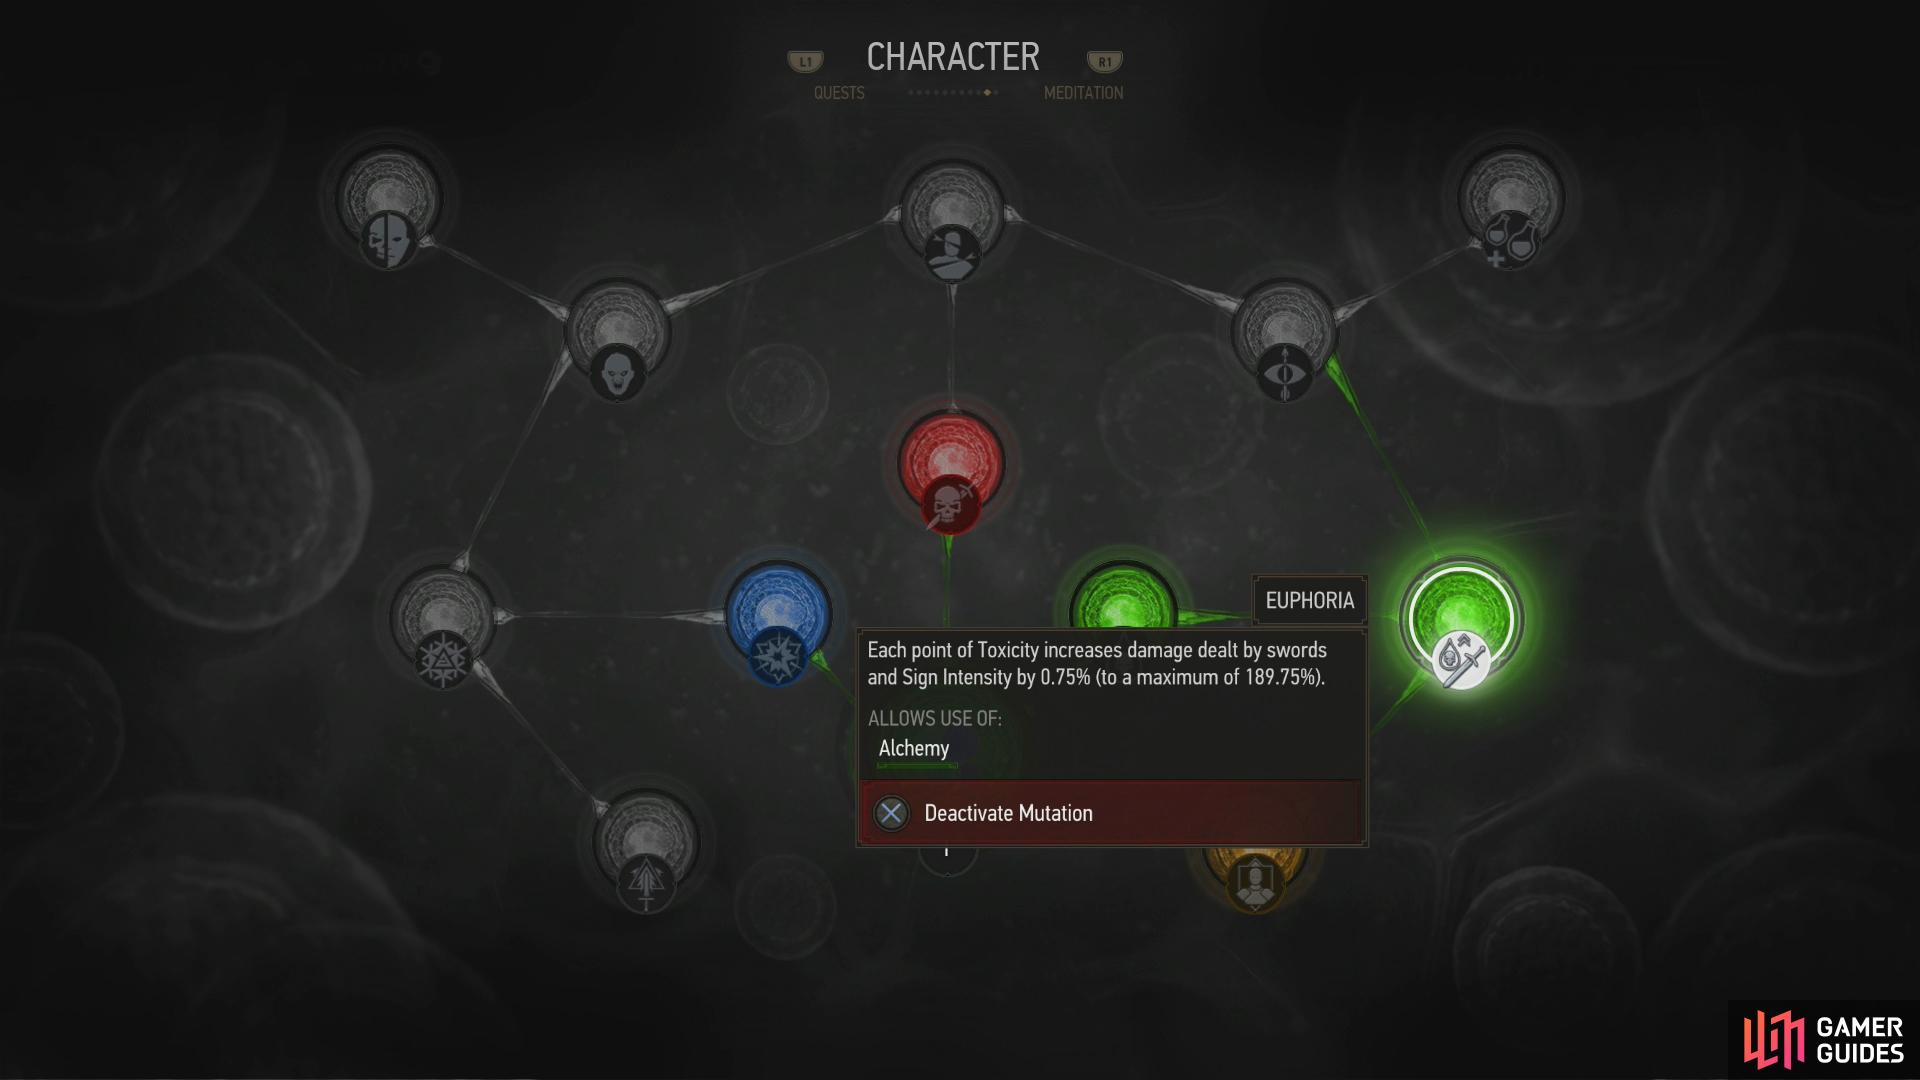 You'll unlock the Mutations Tree, where you can expend Ability Points and Greater Mutagens to unlock new abilities.